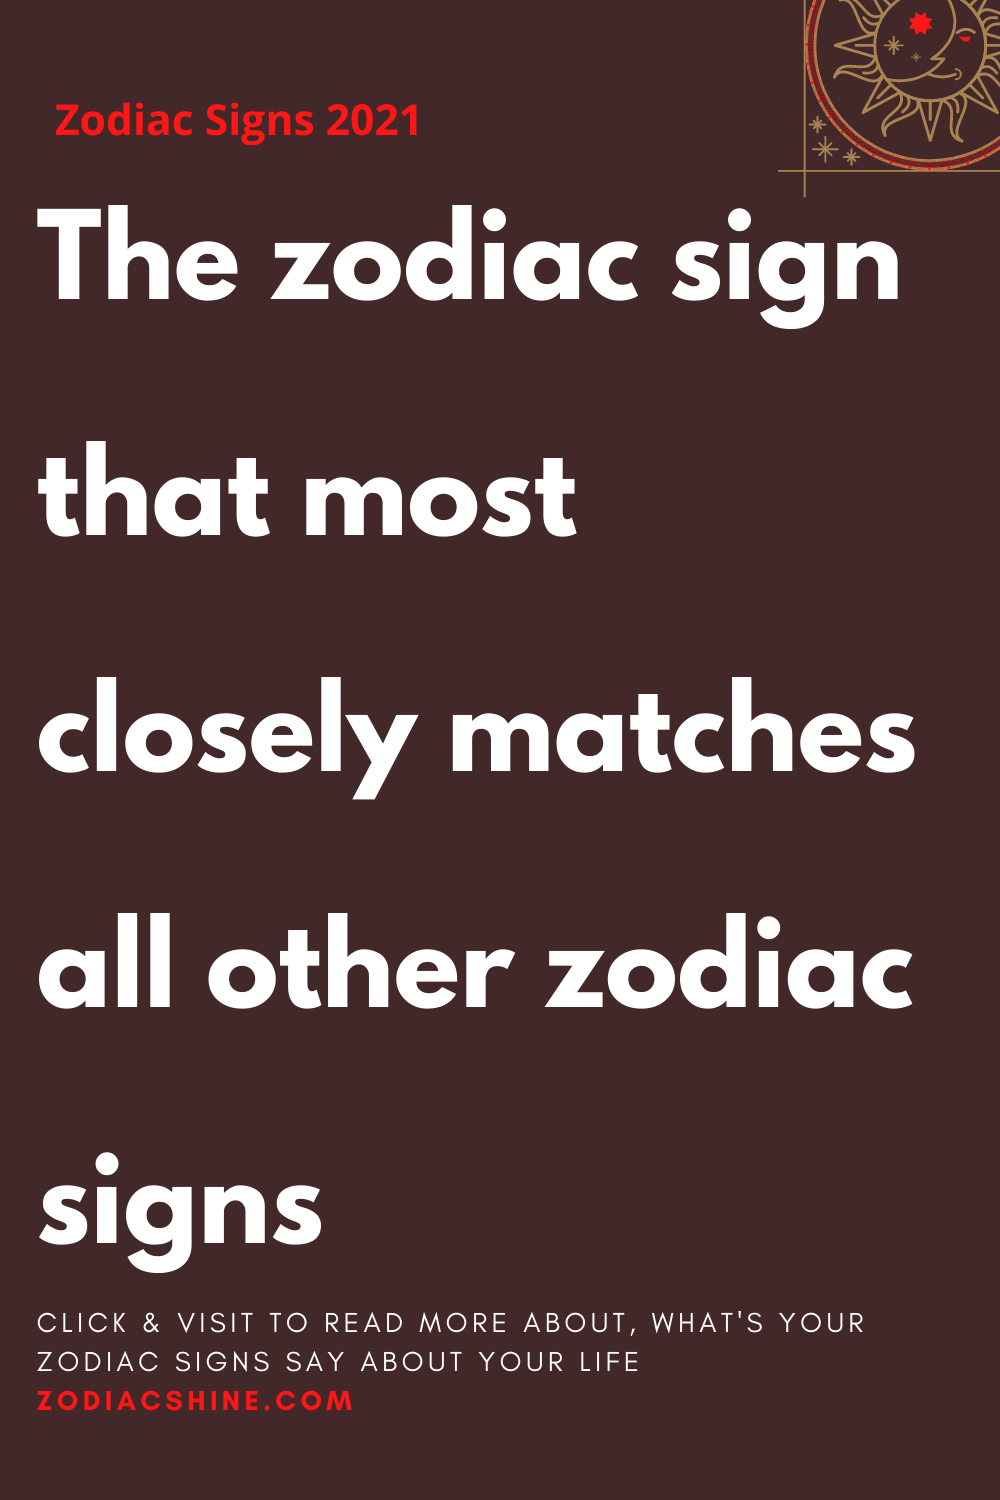 The zodiac sign that most closely matches all other zodiac signs